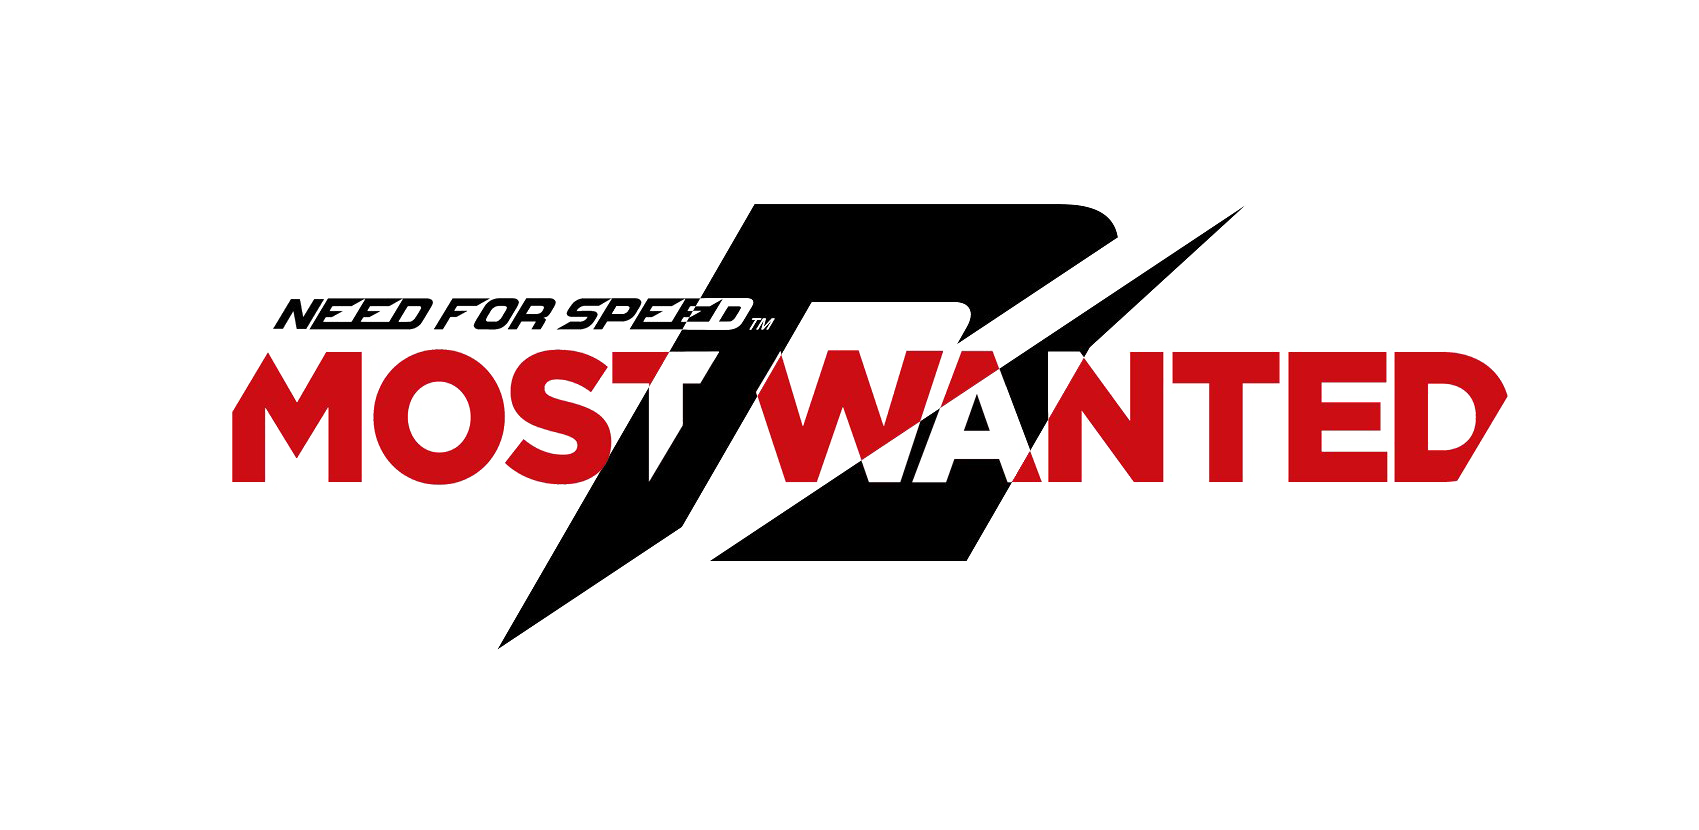 Need logo. NFS лого. Need for Speed most wanted логотип. NFS most wanted 2012 лого. Need for Speed most wanted 2012 logo.